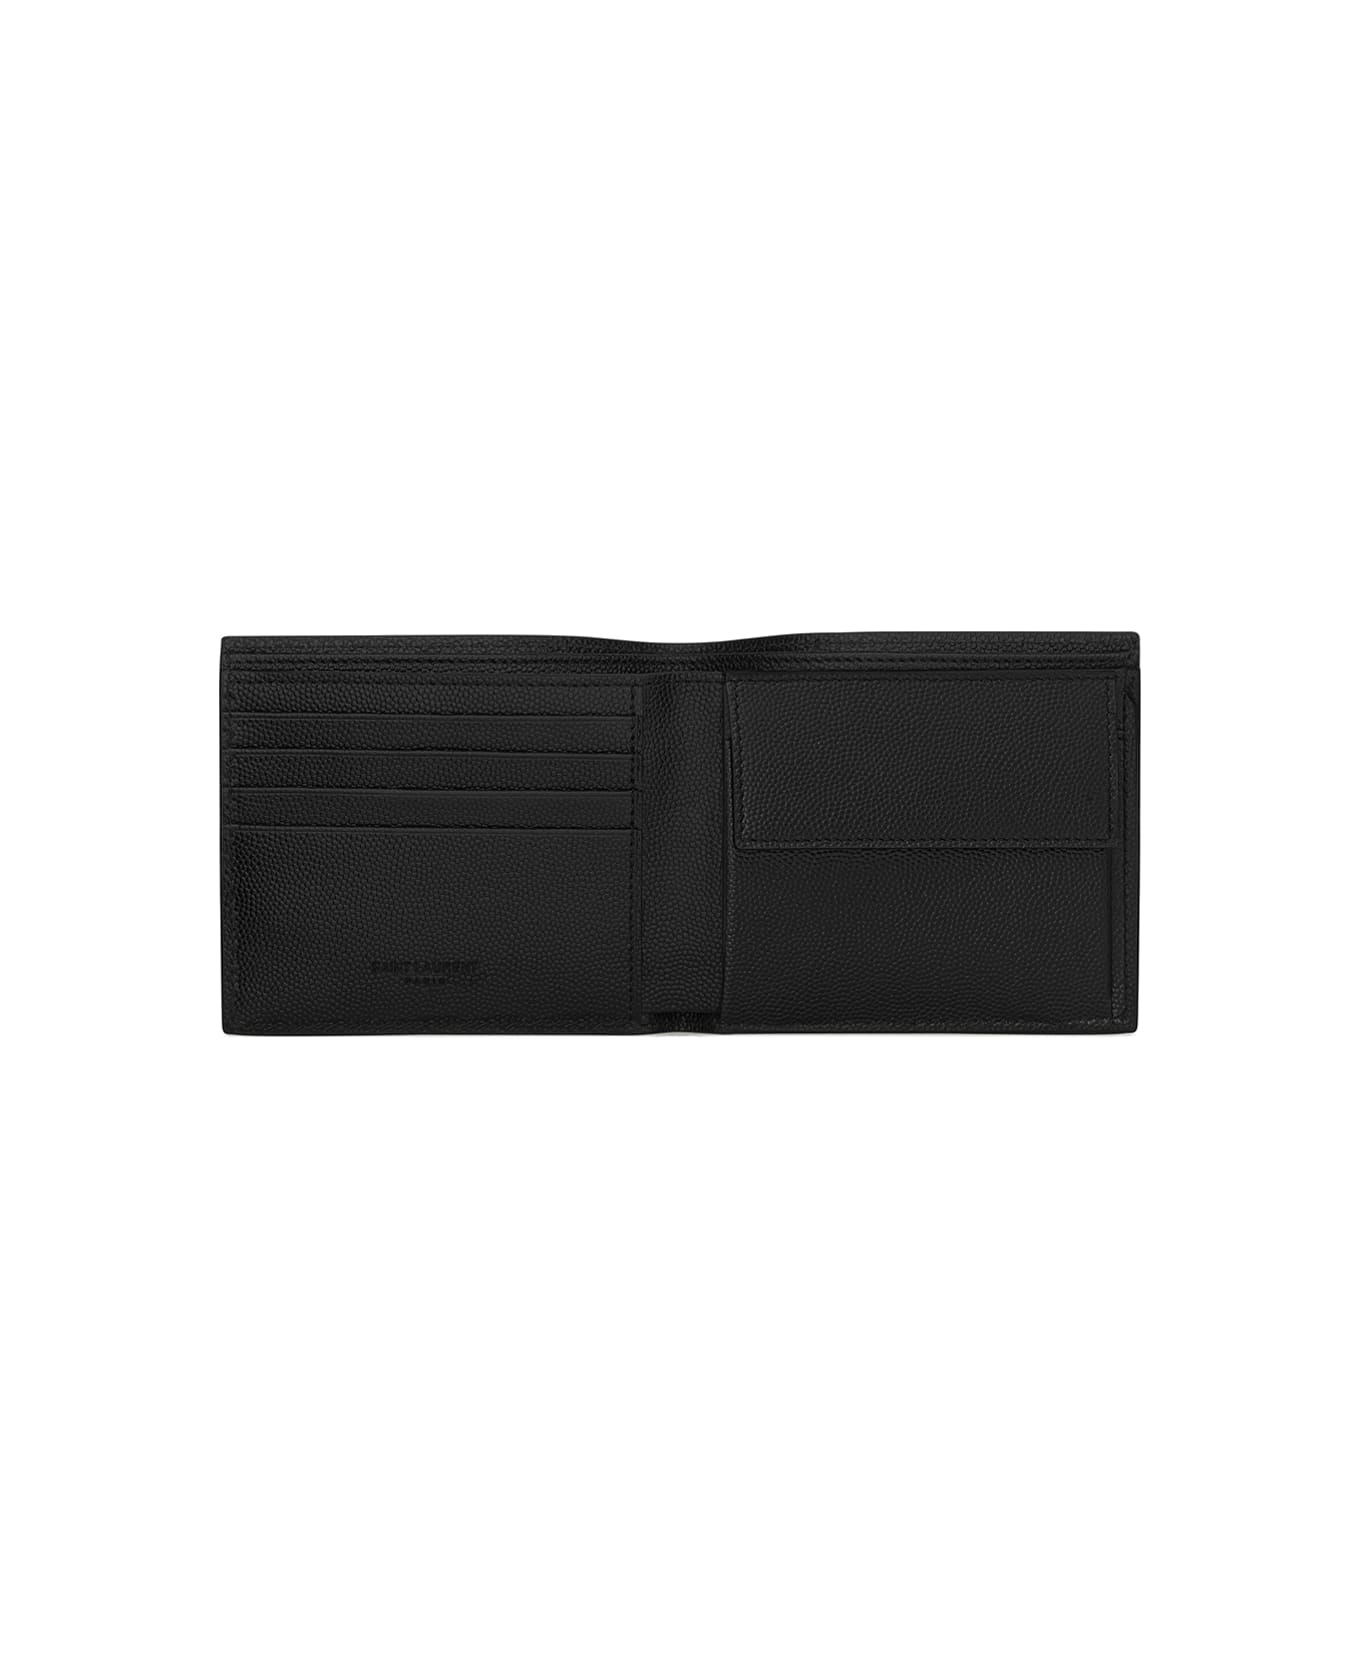 Saint Laurent Wallet In Leather With Coin Purse - Black